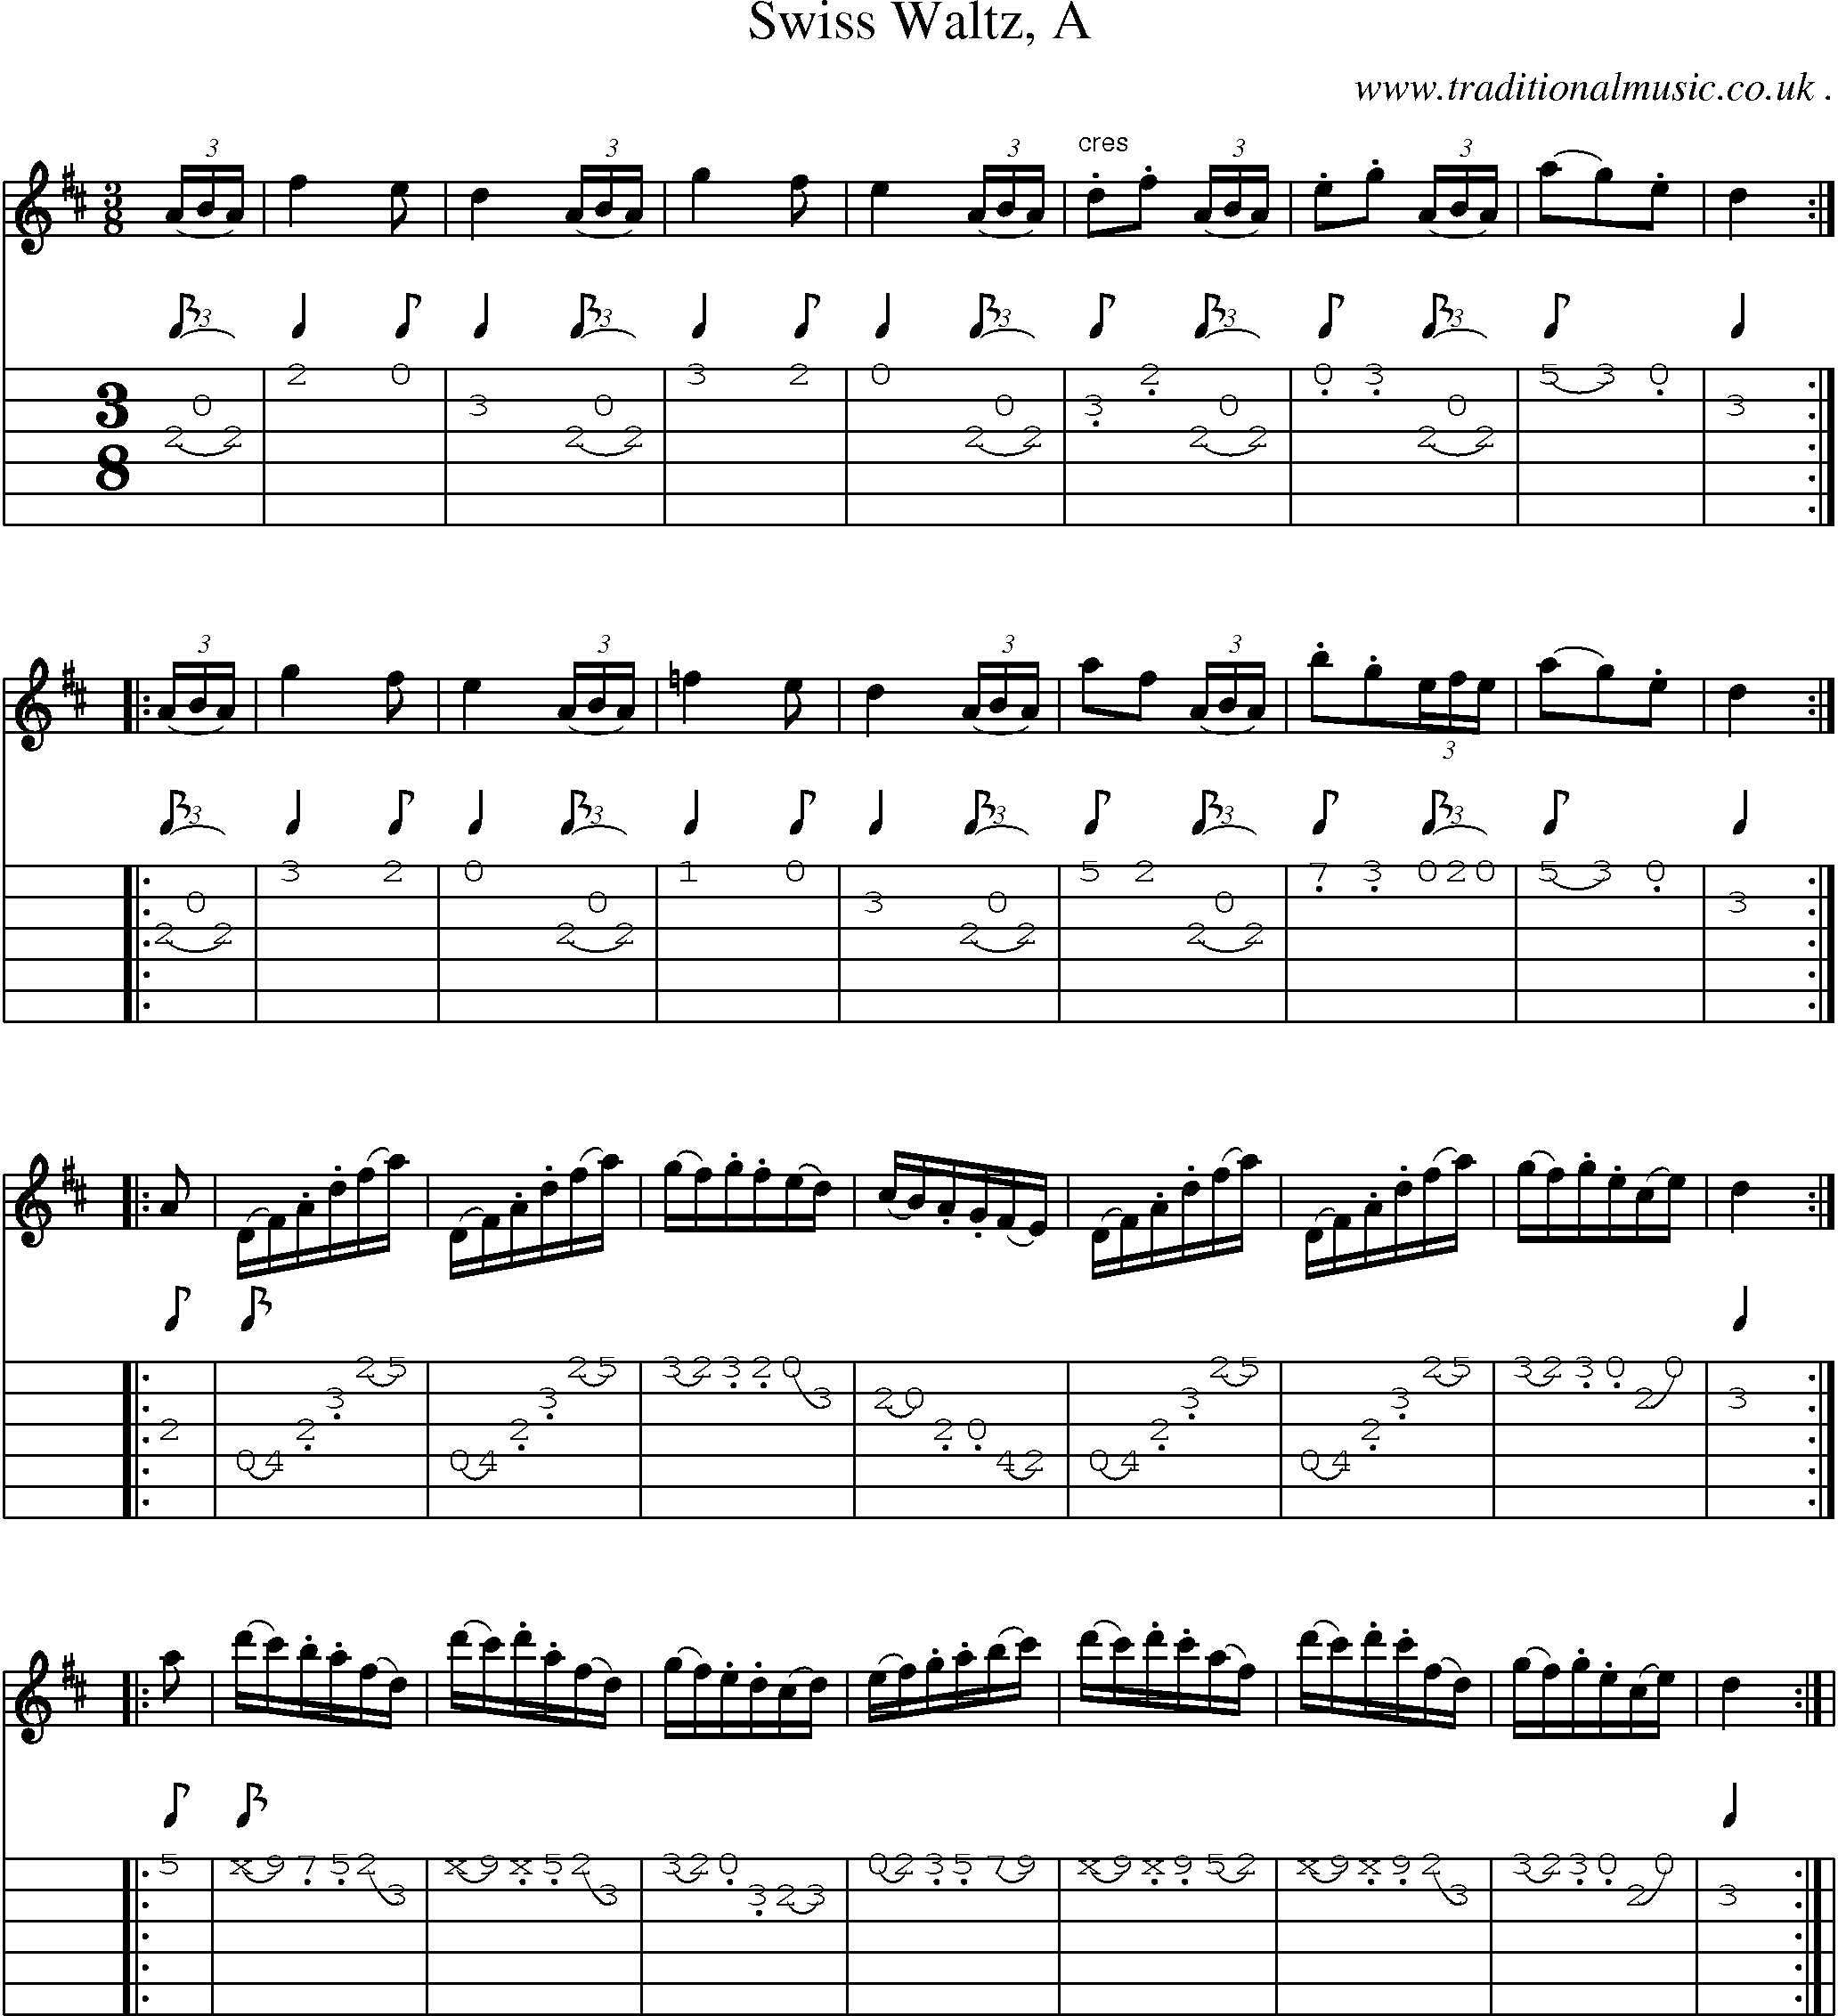 Sheet-Music and Guitar Tabs for Swiss Waltz A